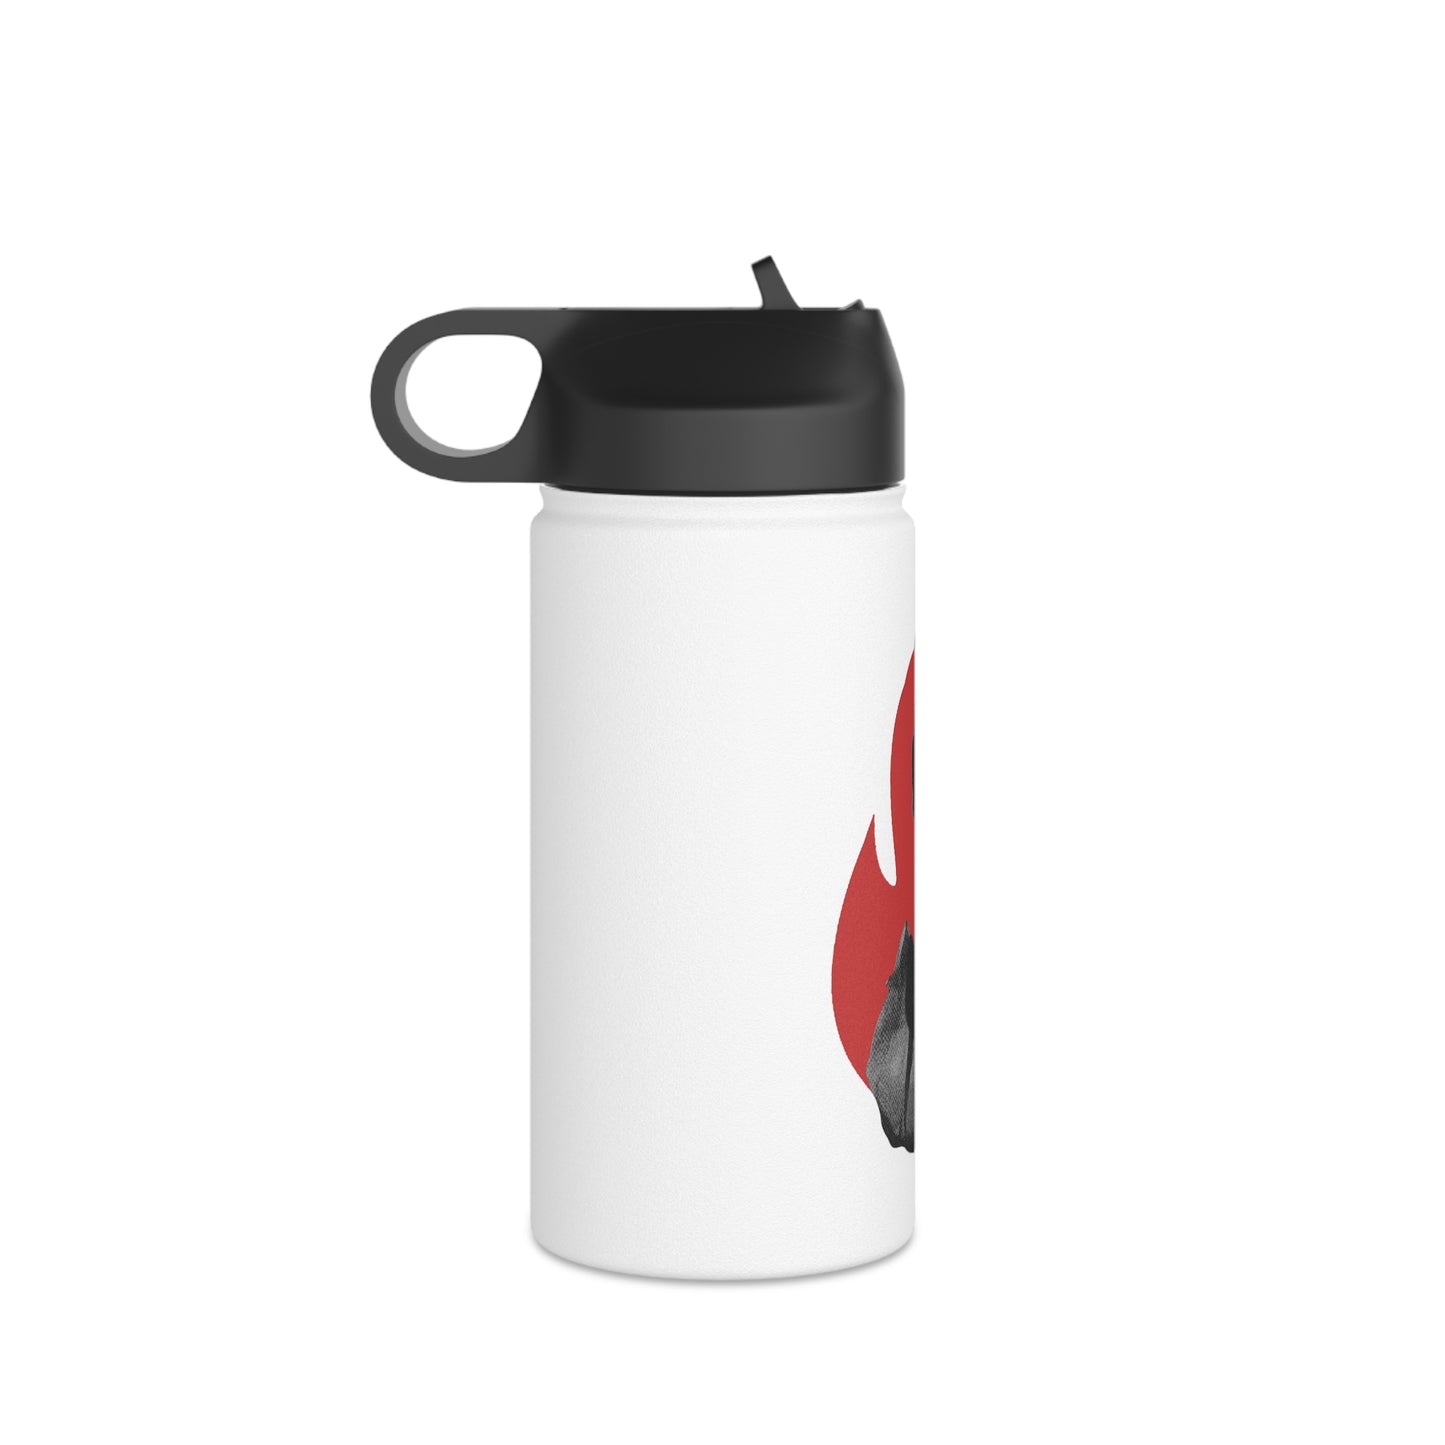 Flame (မီးတောက်) Stainless Steel Water Bottle